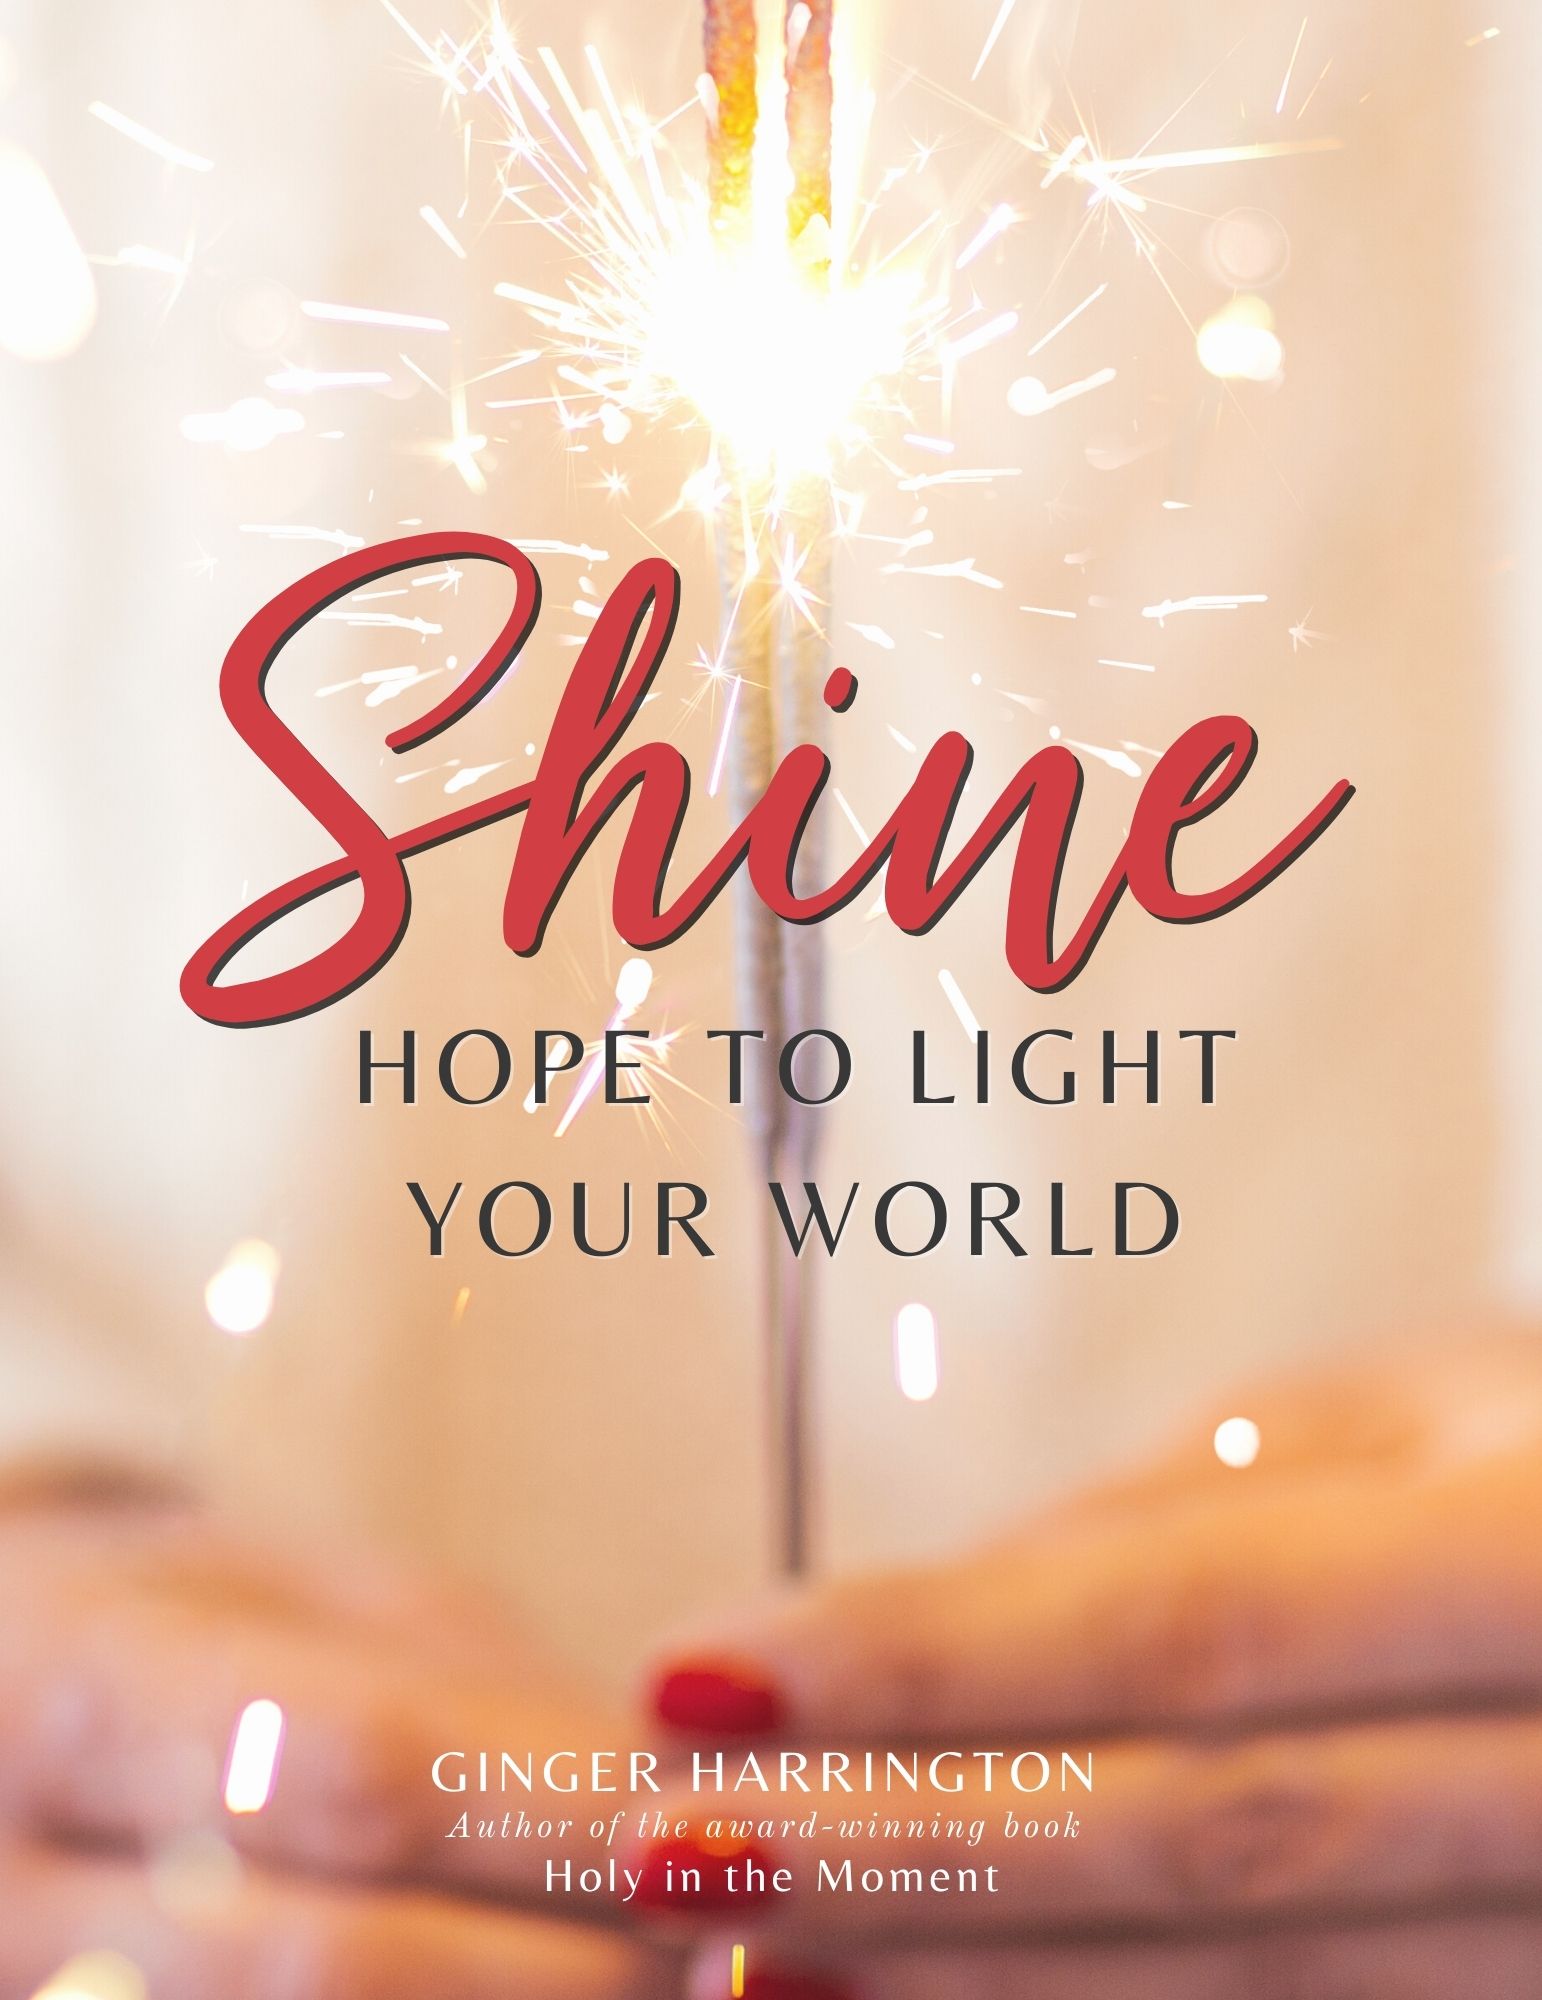 Light of sparkler signifies the light of Christ in this book cover